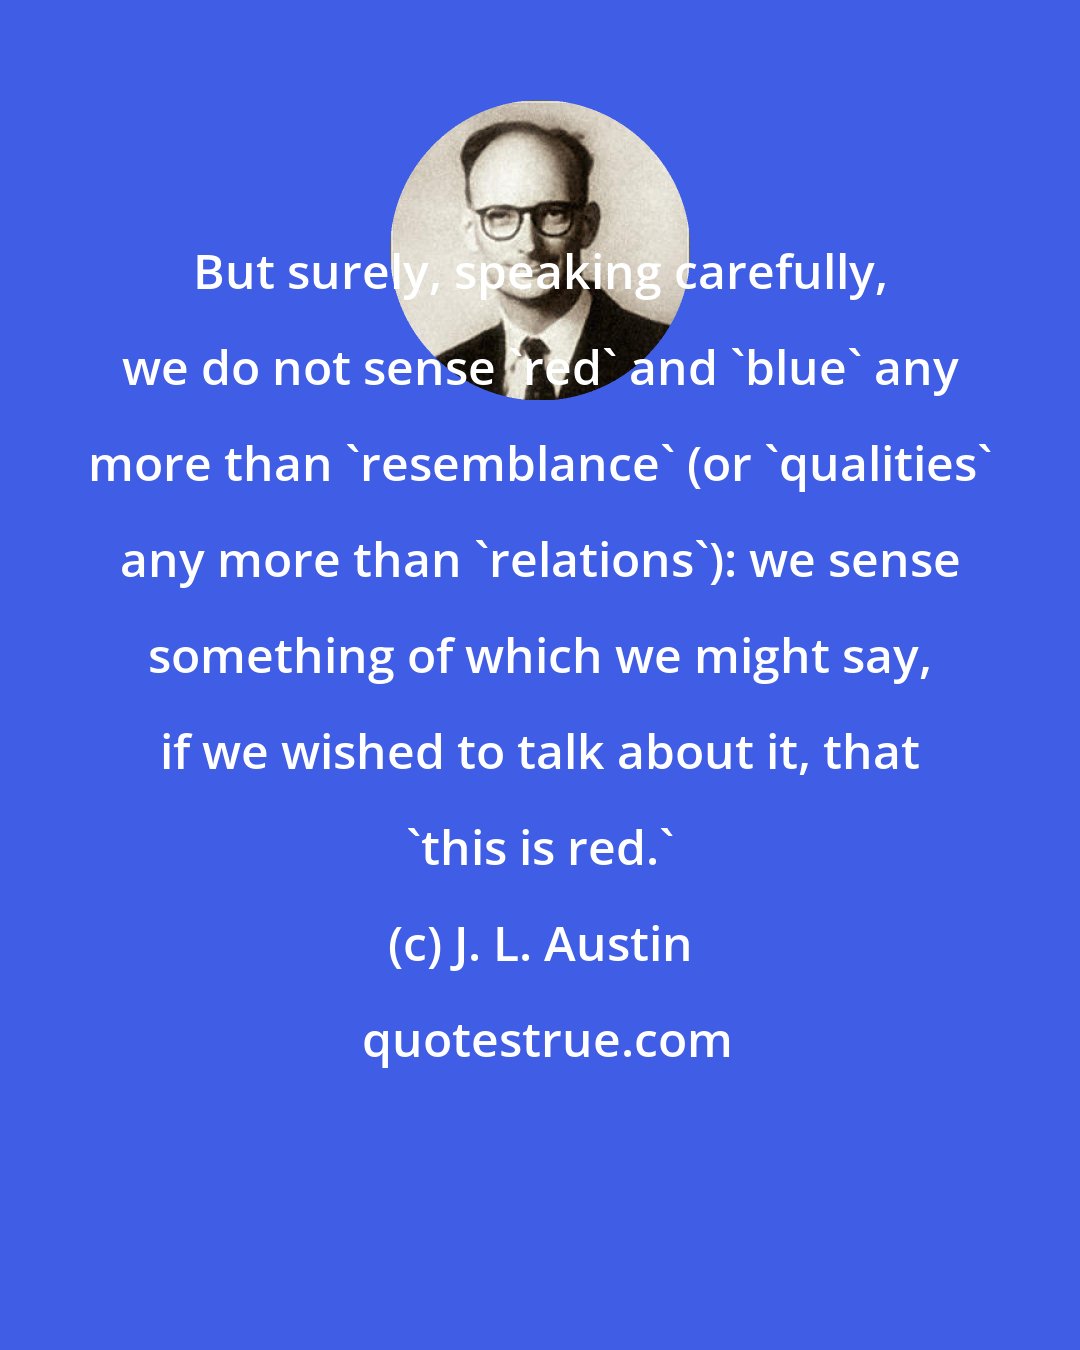 J. L. Austin: But surely, speaking carefully, we do not sense 'red' and 'blue' any more than 'resemblance' (or 'qualities' any more than 'relations'): we sense something of which we might say, if we wished to talk about it, that 'this is red.'